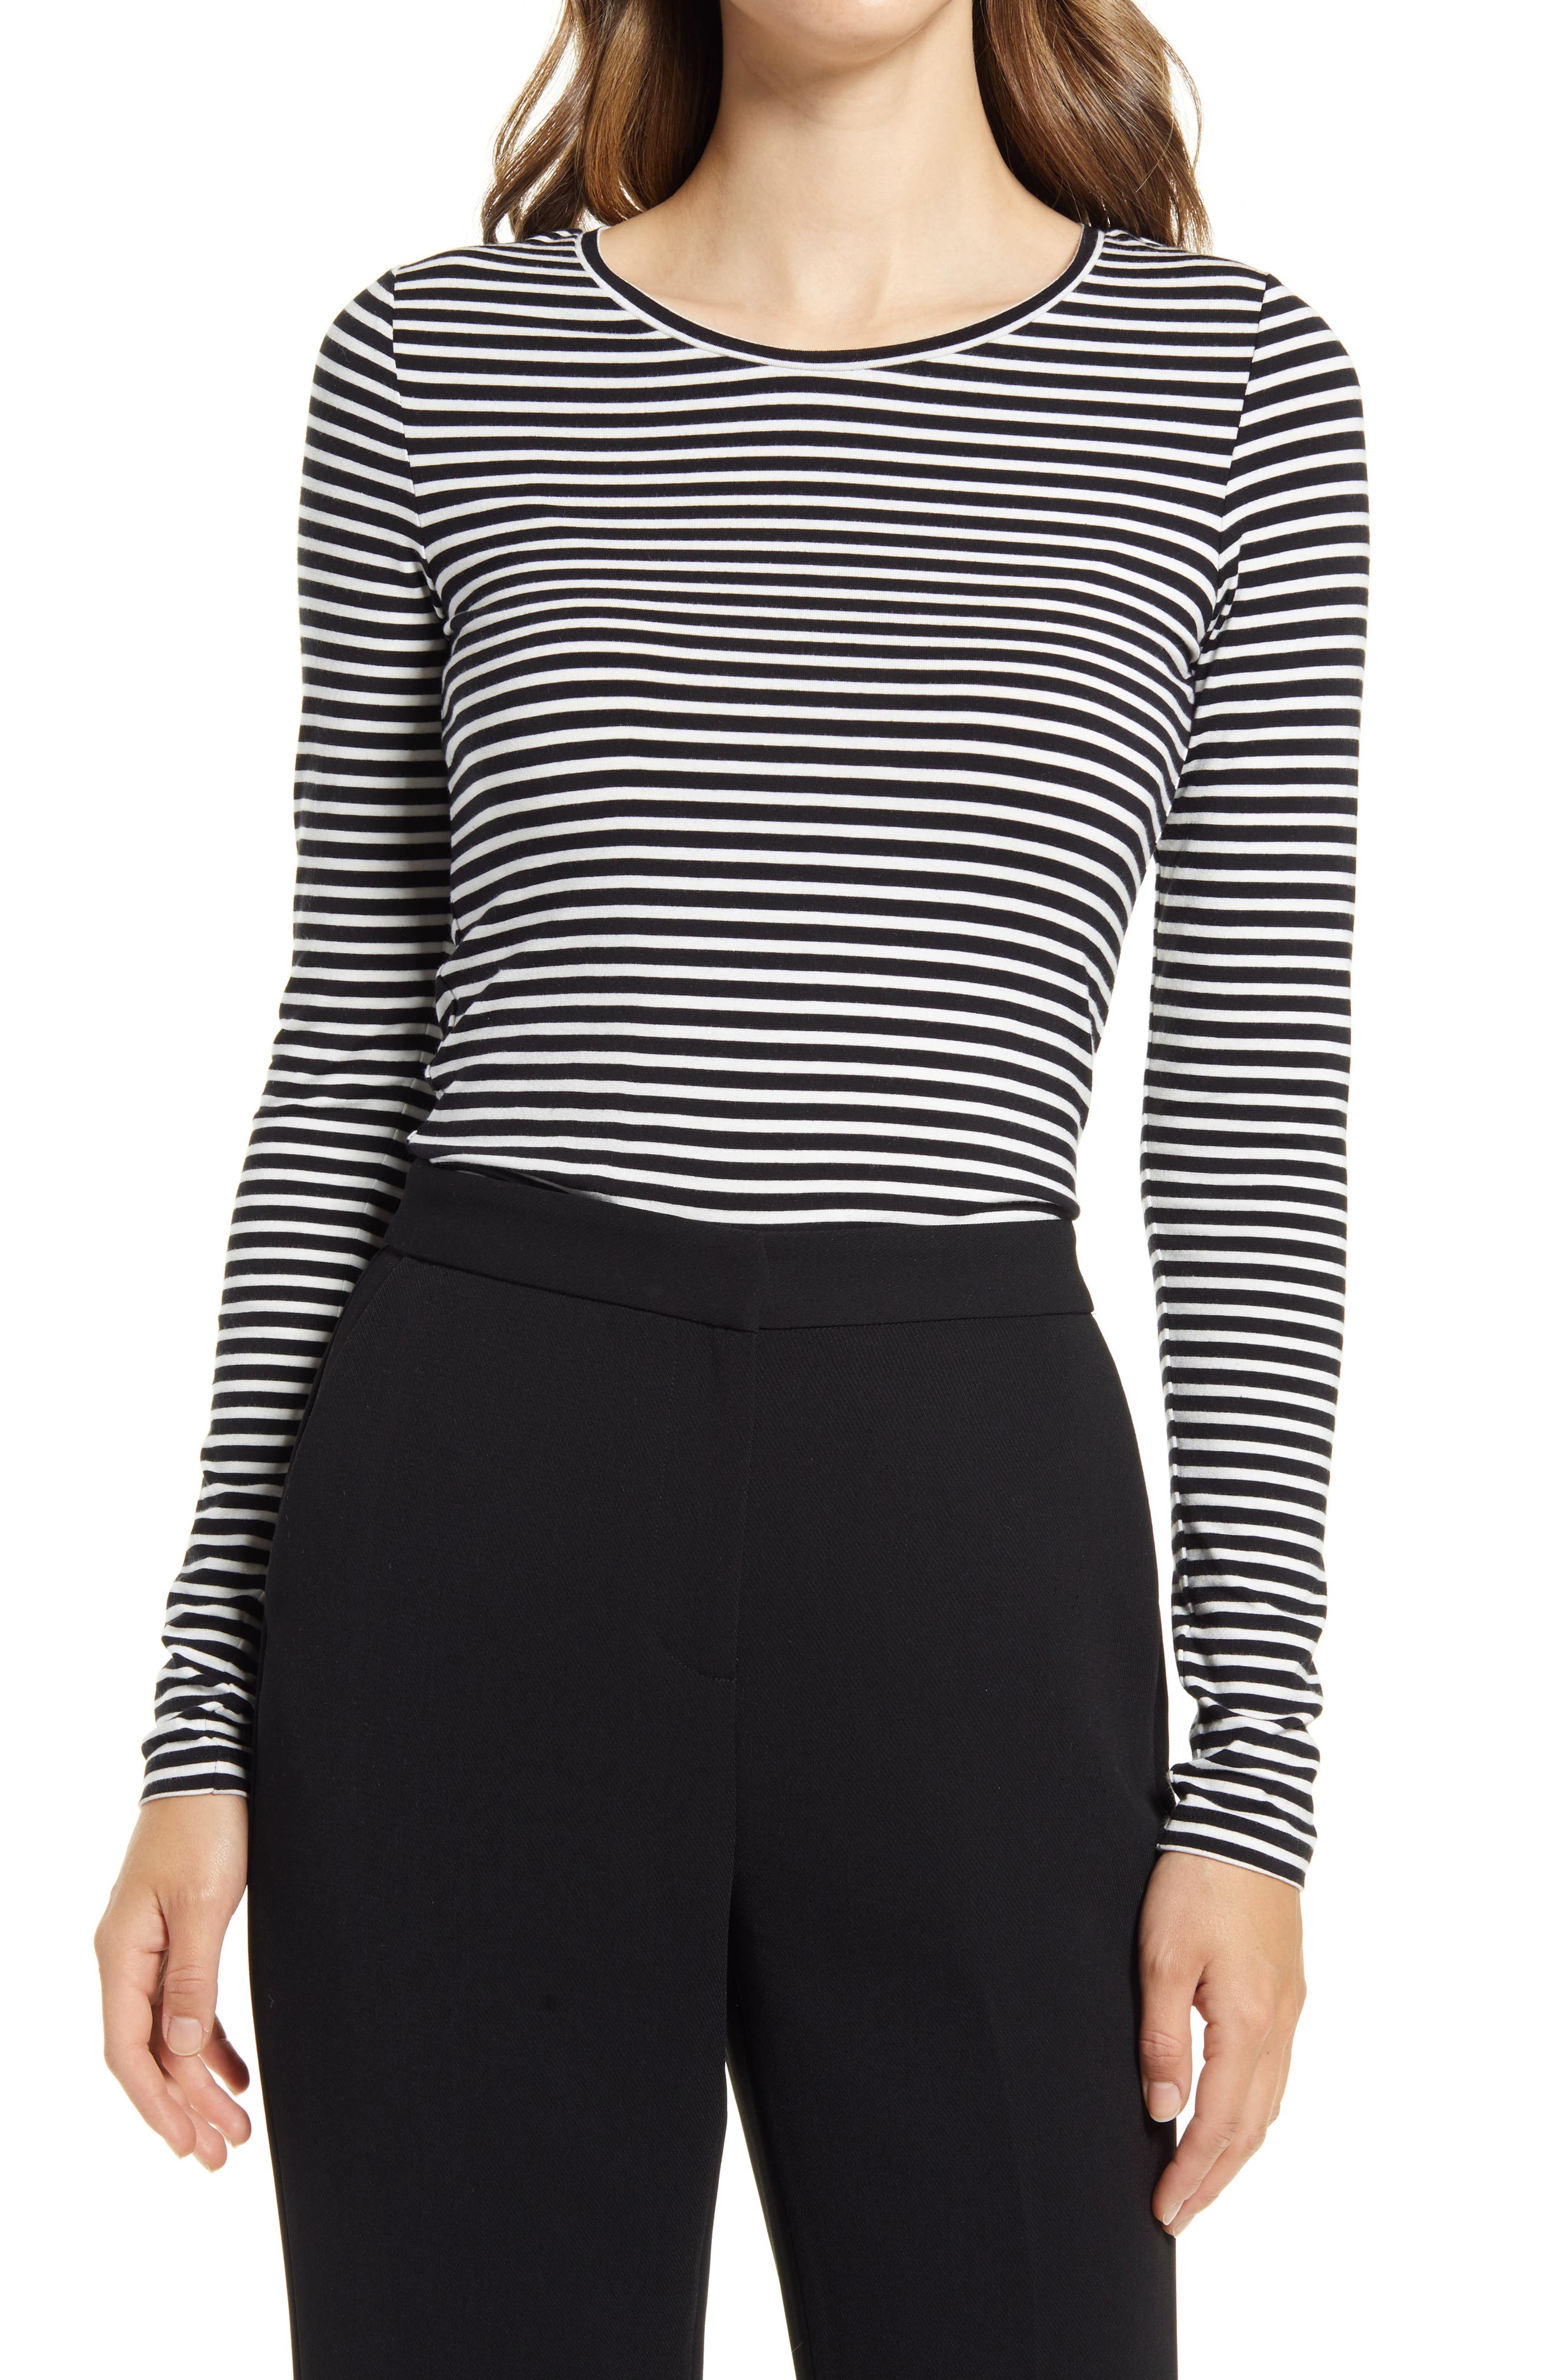 black and white striped long sleeve tee